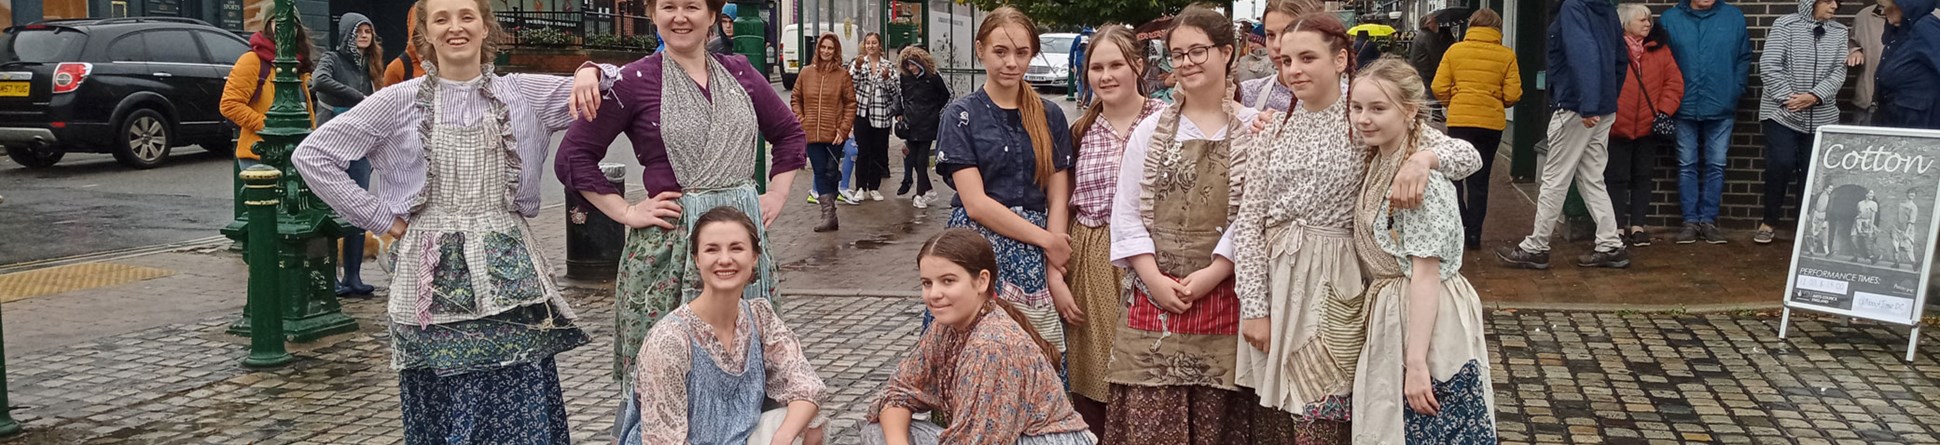 Young women and schoolgirls dressed as Victorian or Edwardian mill girls pose together for a photograph in a pedestrian precinct.